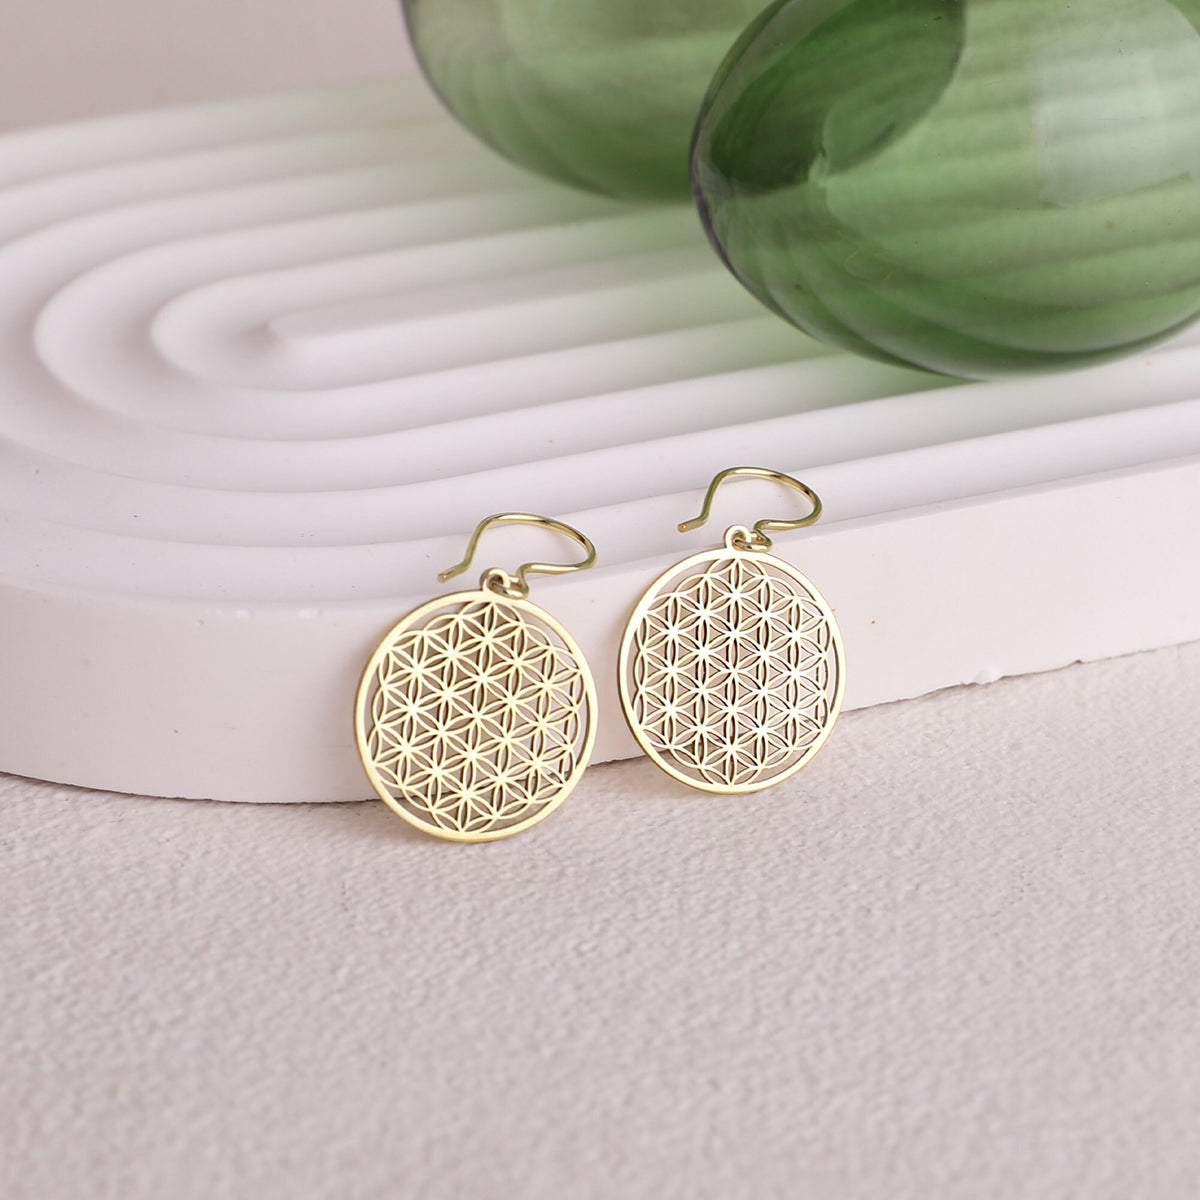 Sacred Geometry Dangle Earrings, Sterling Silver, Gold and Rose Gold Jewelry, Ships Next Day Flower of Life Earrings, Seed of Life Jewelry